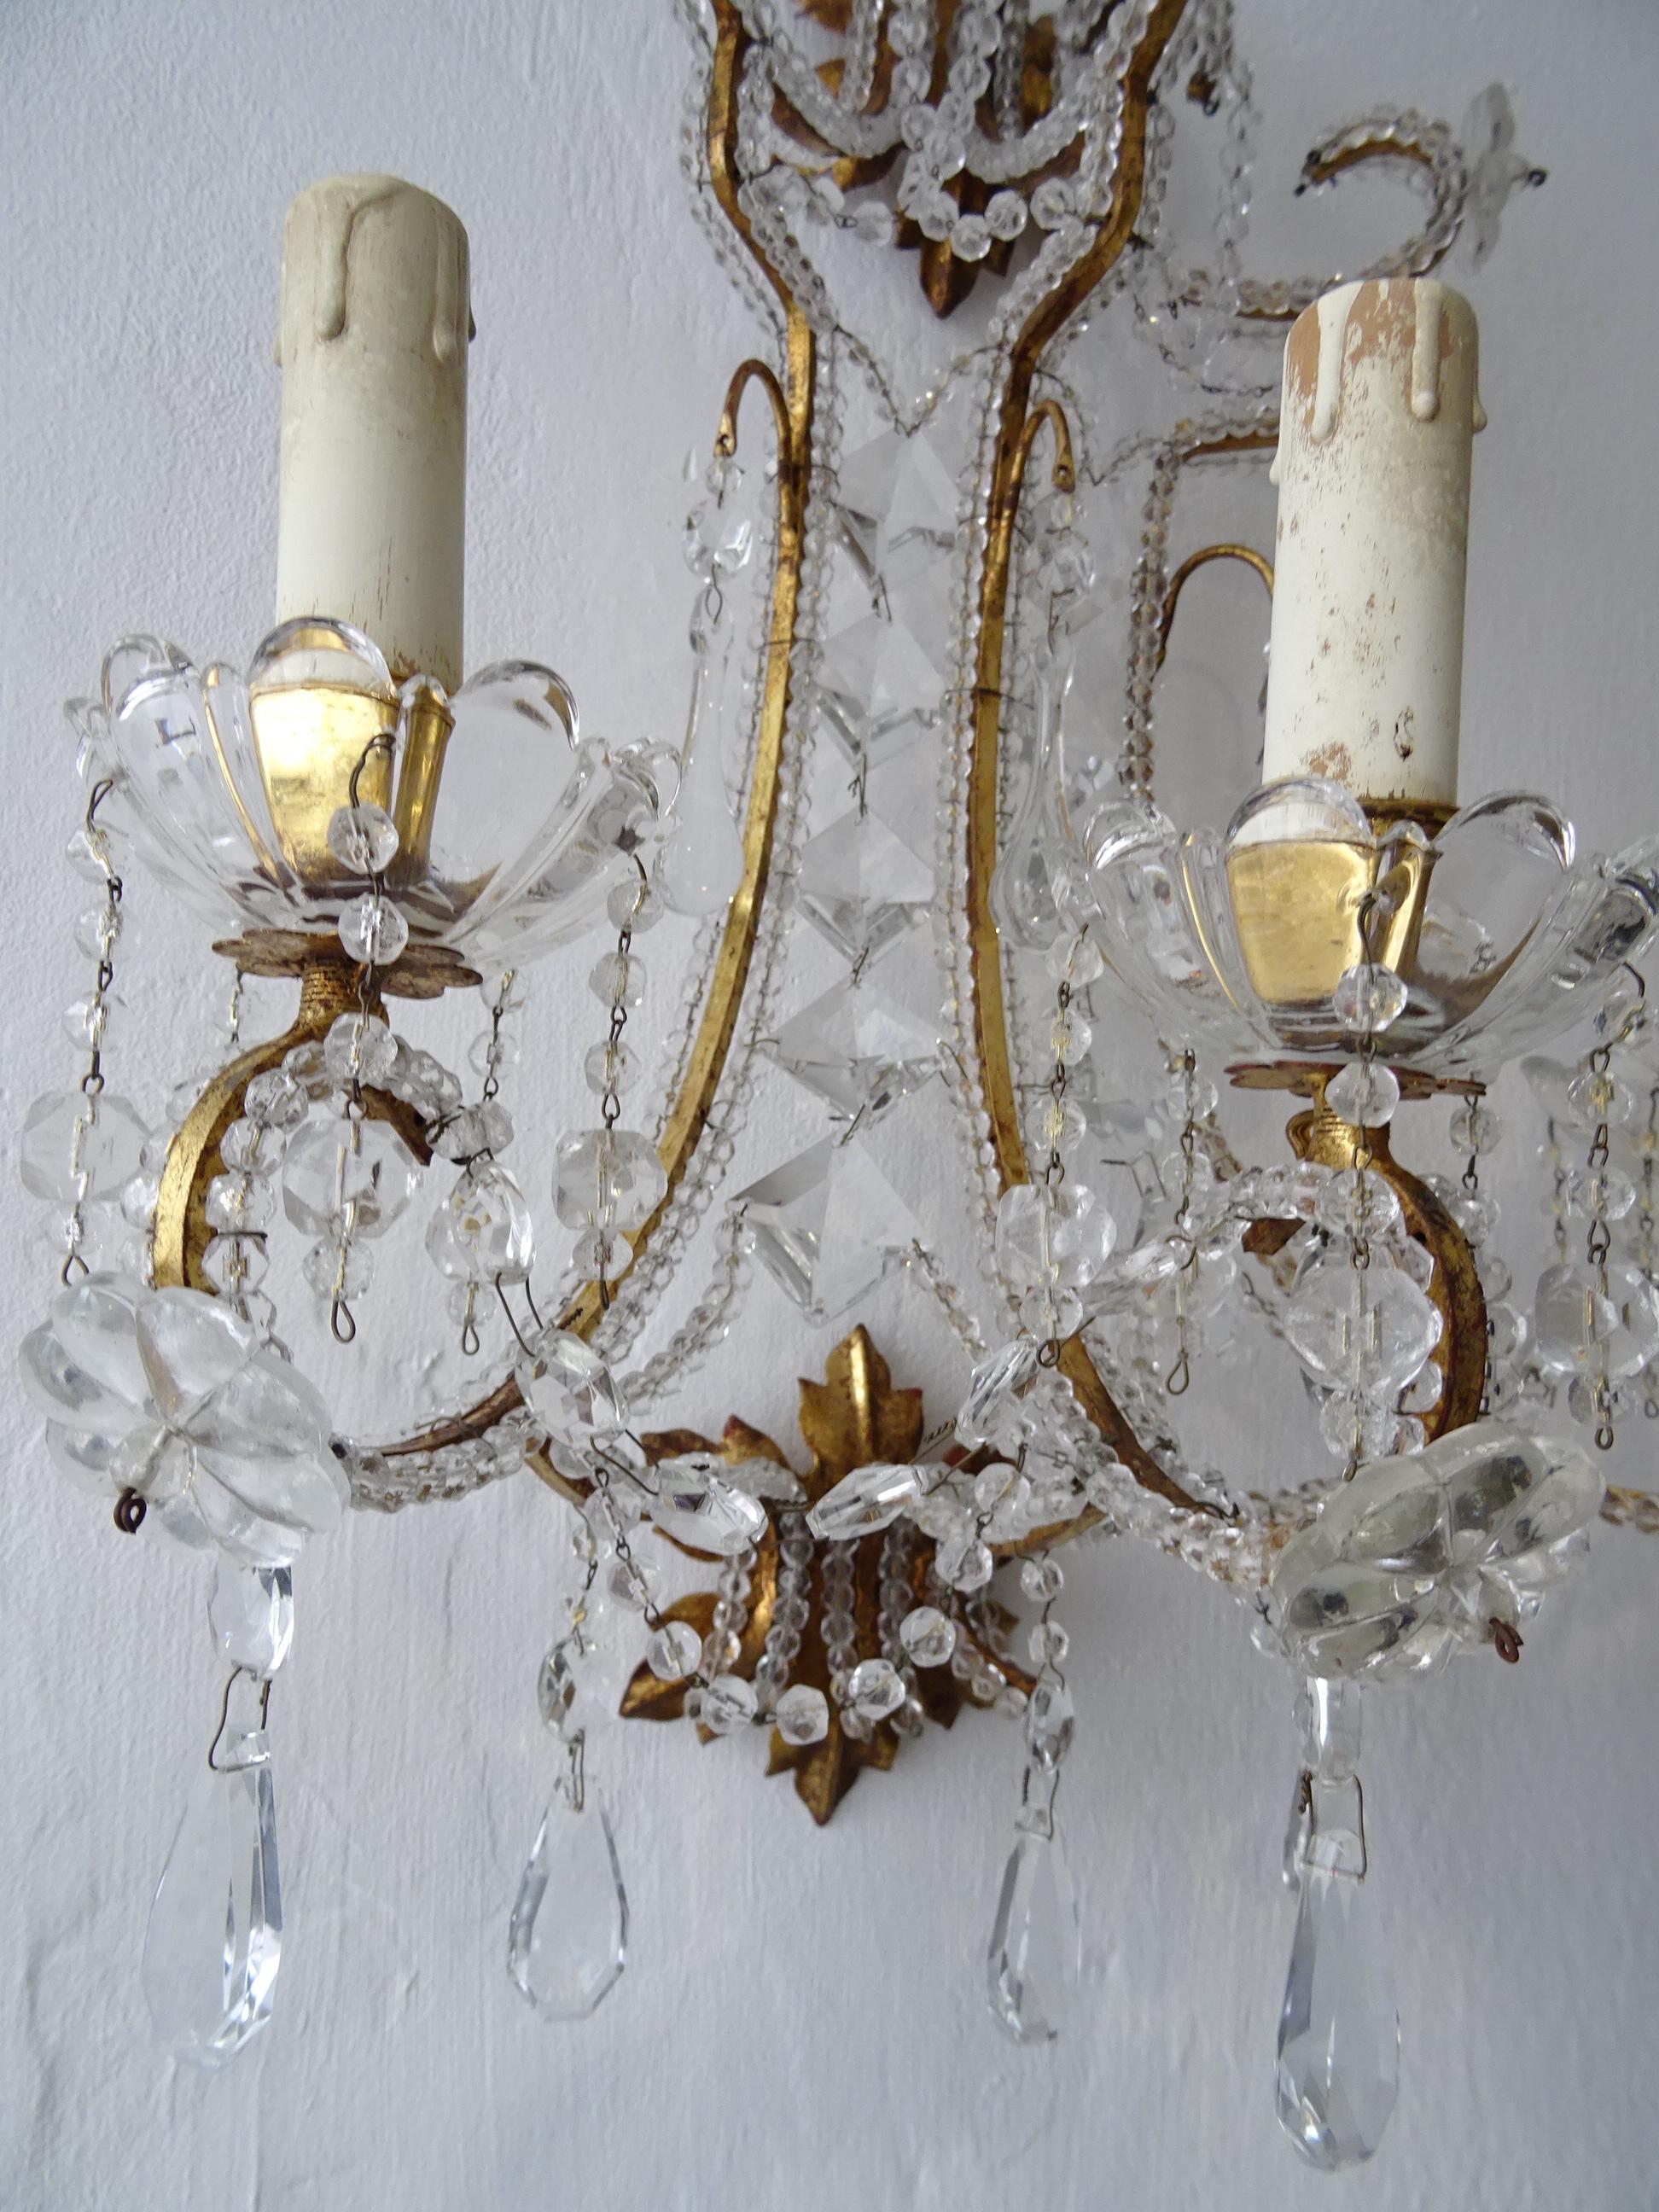 Italian Big Beaded Crystal Prisms Murano Drops Sconces Gold Gilt Metal c1900 For Sale 2